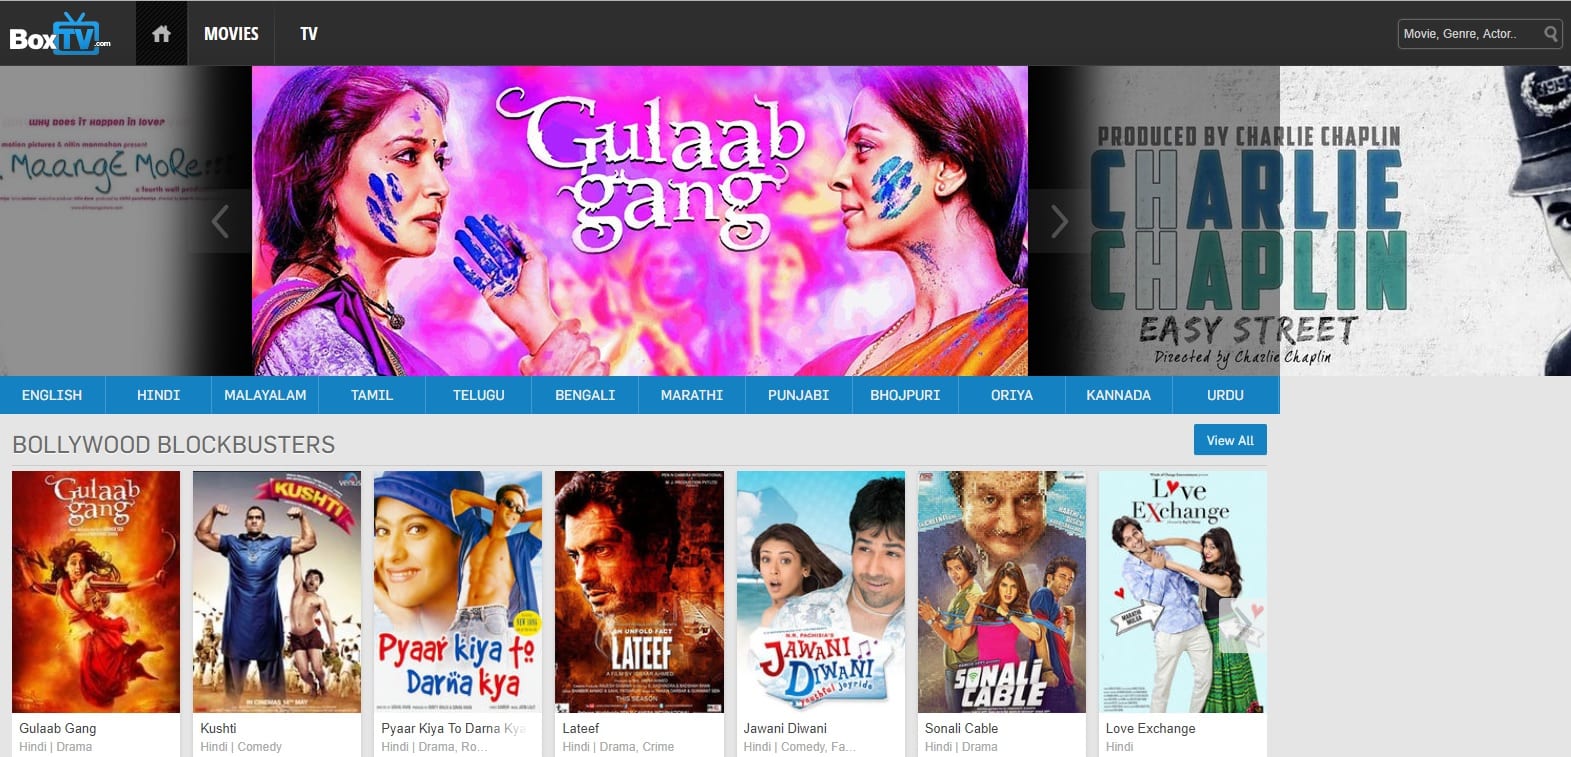 15 Best Sites To Watch Hindi Movies Online For Free In 2023 - 2